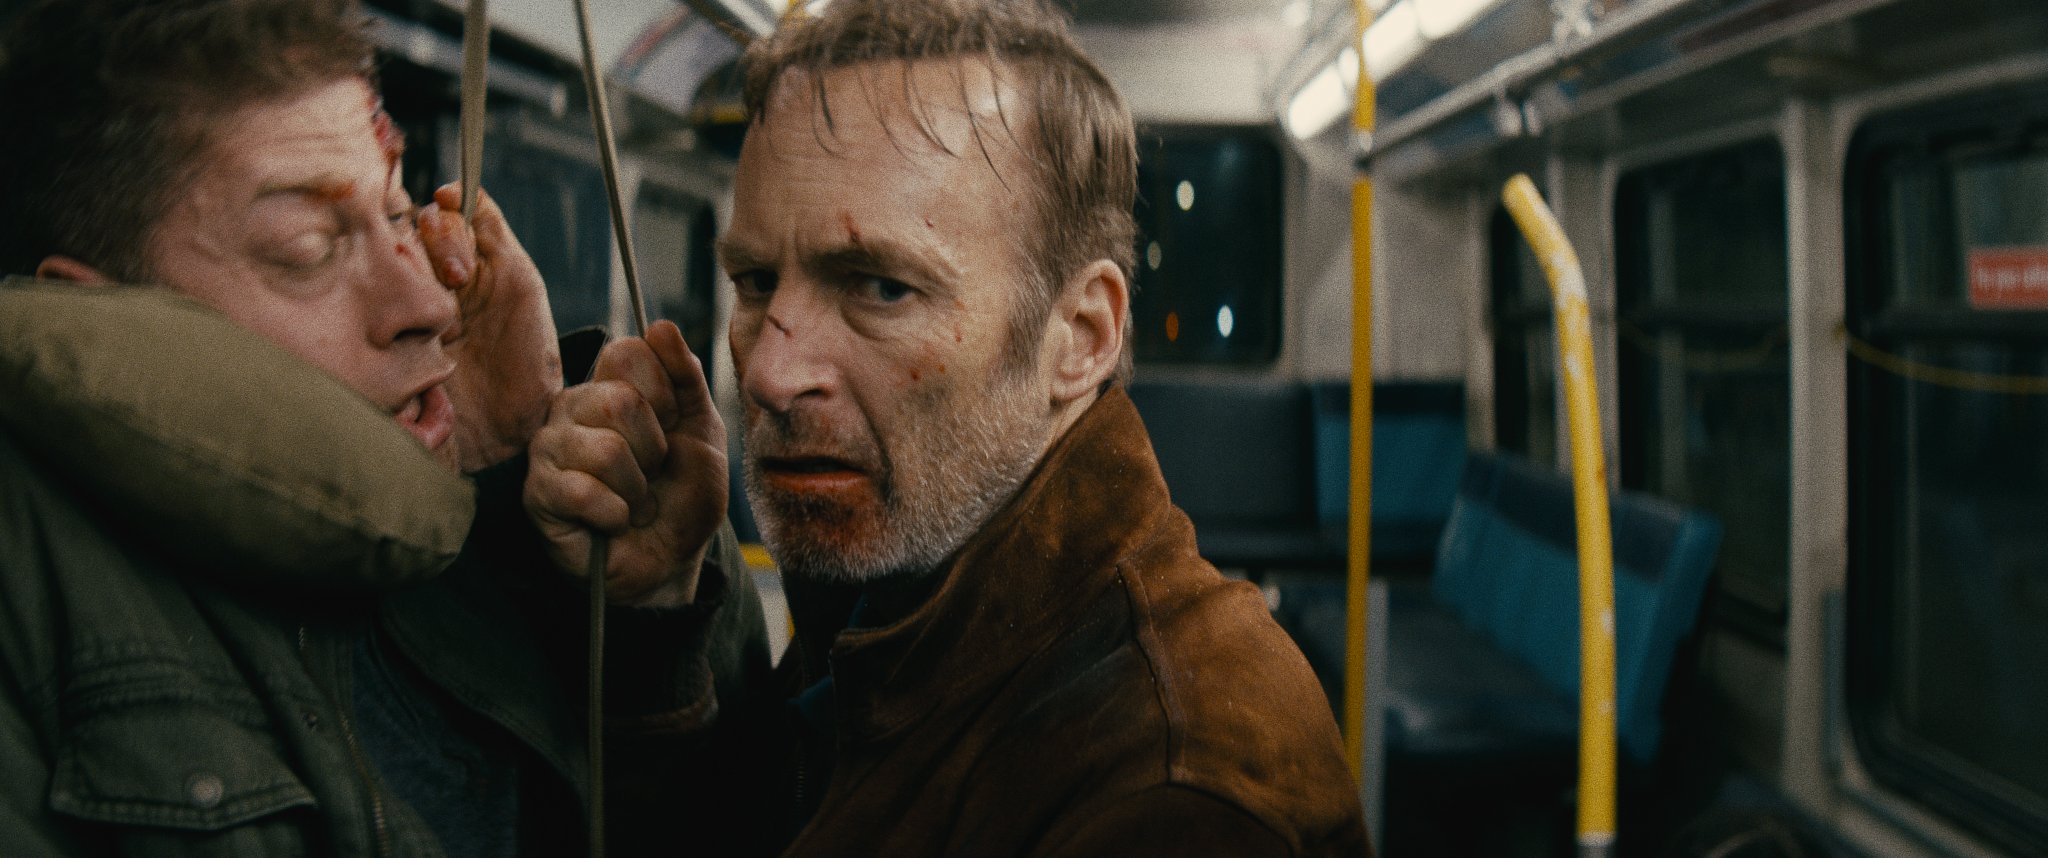 Nobody: Bob Odenkirk fights Alain Moussi on the bus